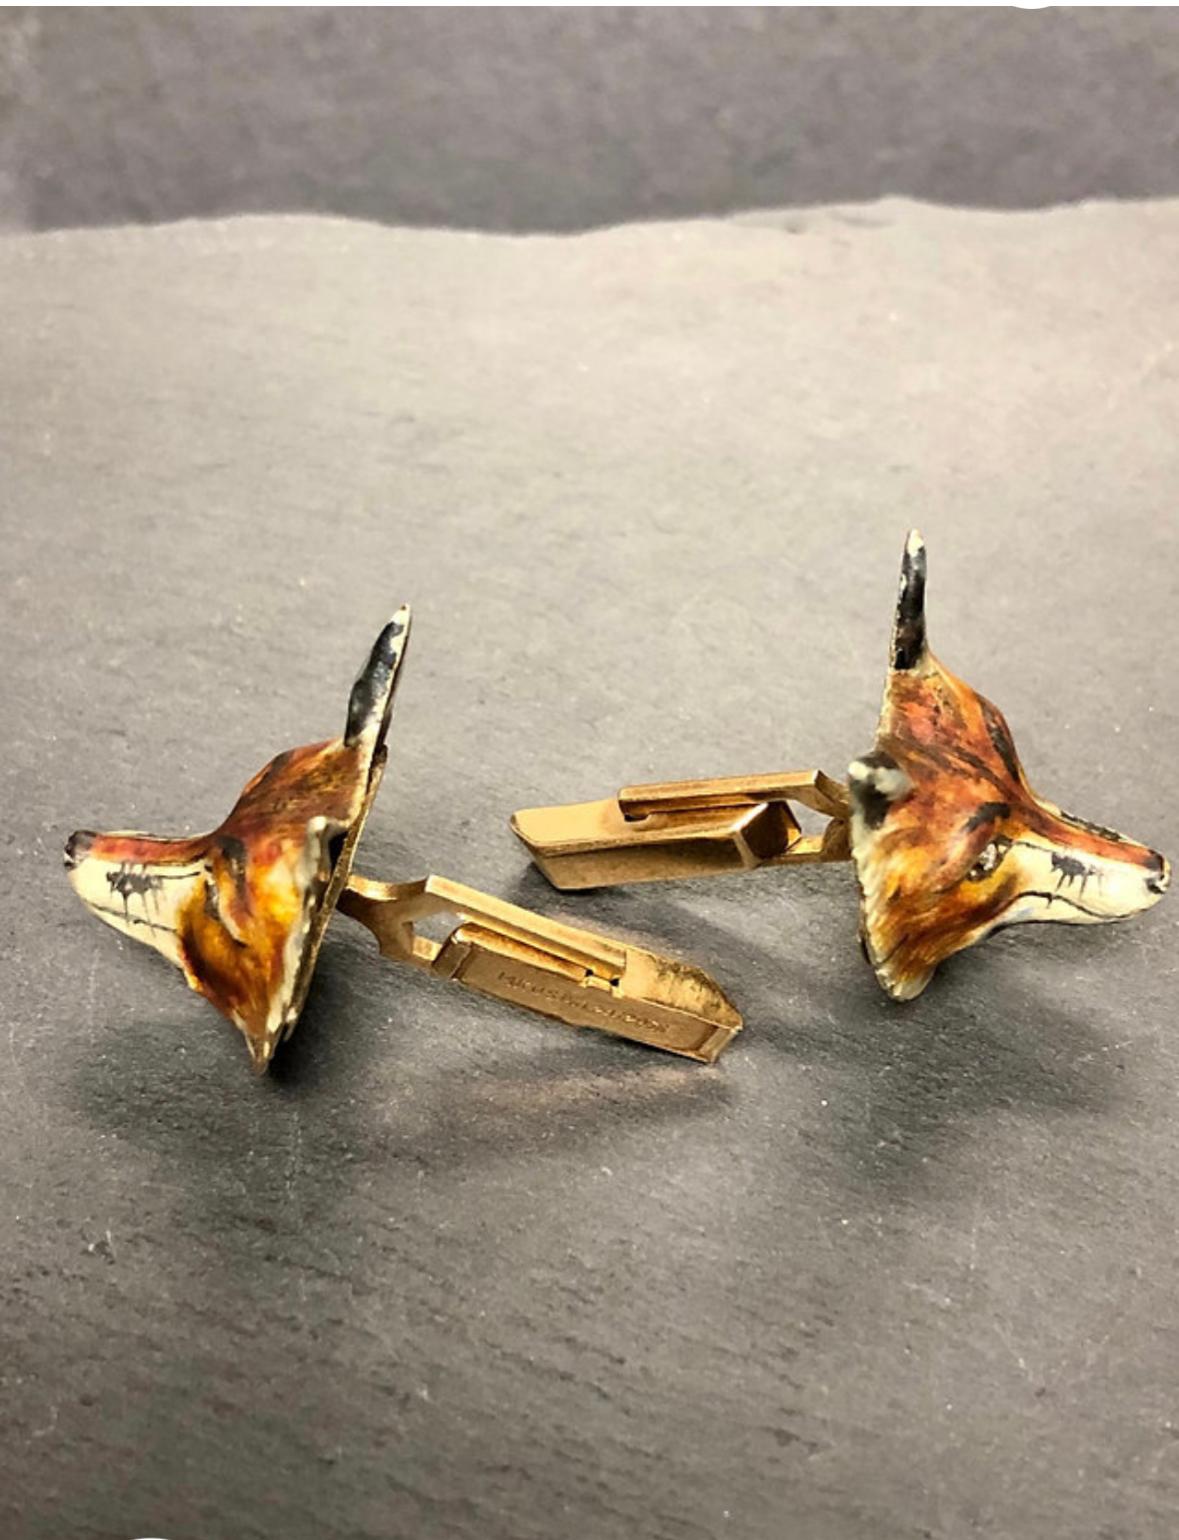 The mosts exceptional pair of enamel cufflinks we have ever had in stock. We place them some time in maybe the early 40’s based on the style and craftsmanship. The enamel coloring is incredible and the detail is amazing. They’re almost three